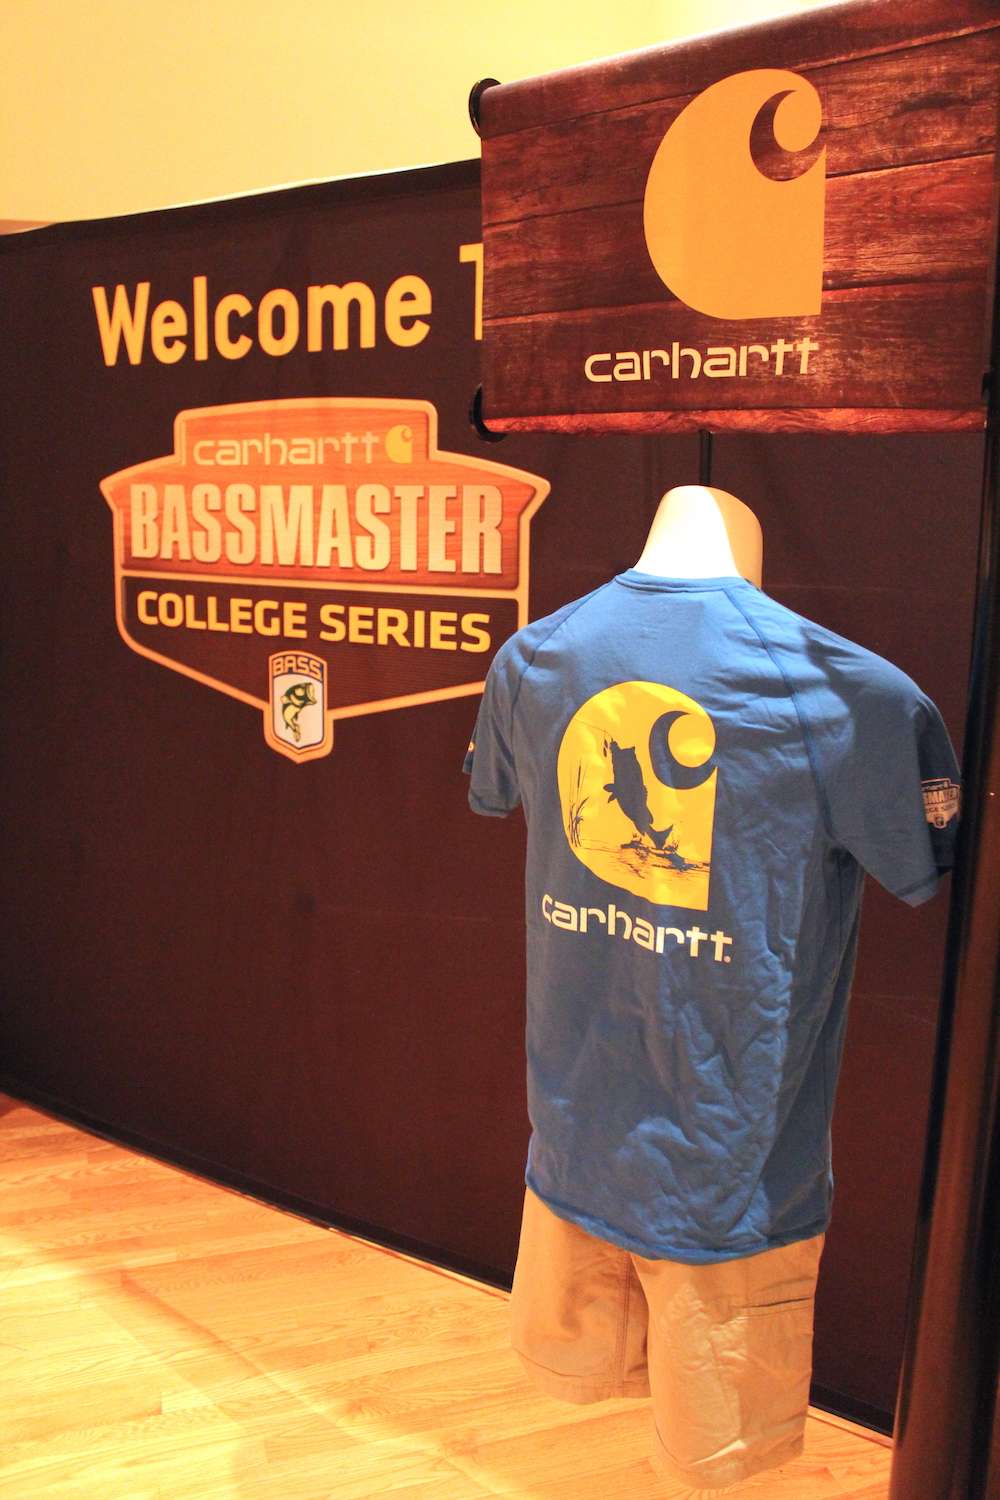 Carhartt really rolled out the red carpet this week. 